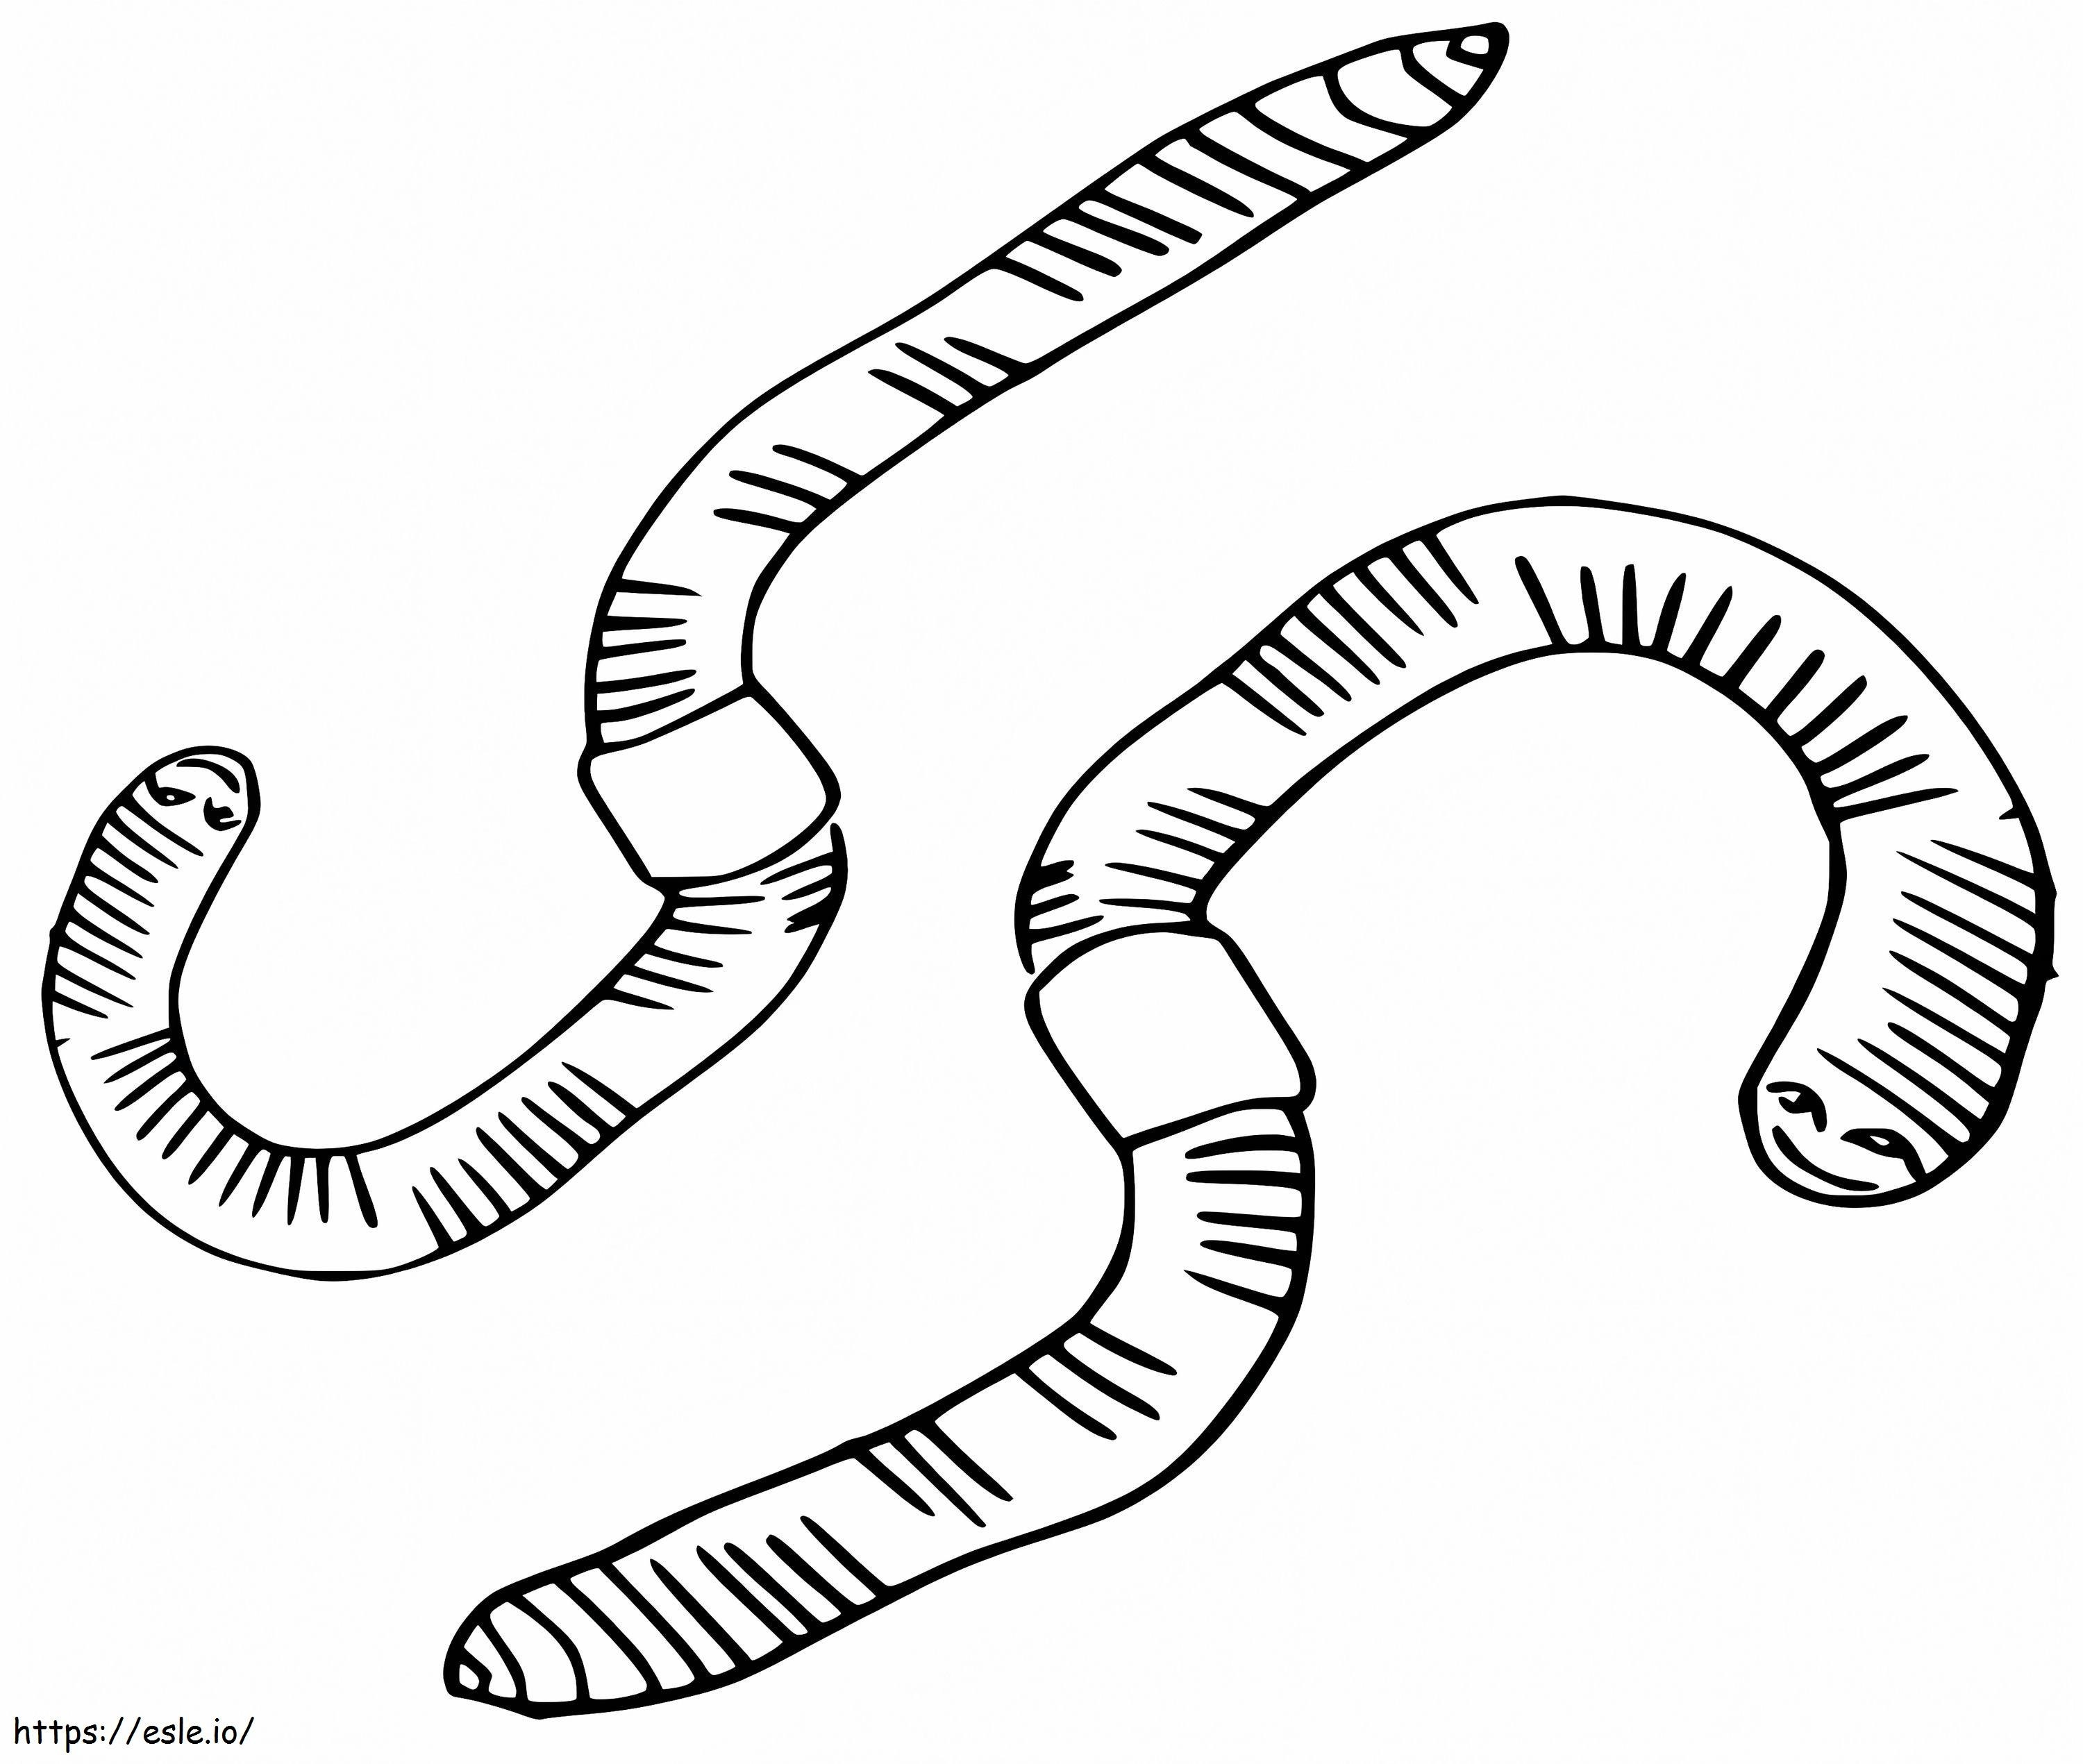 Earthworms coloring page